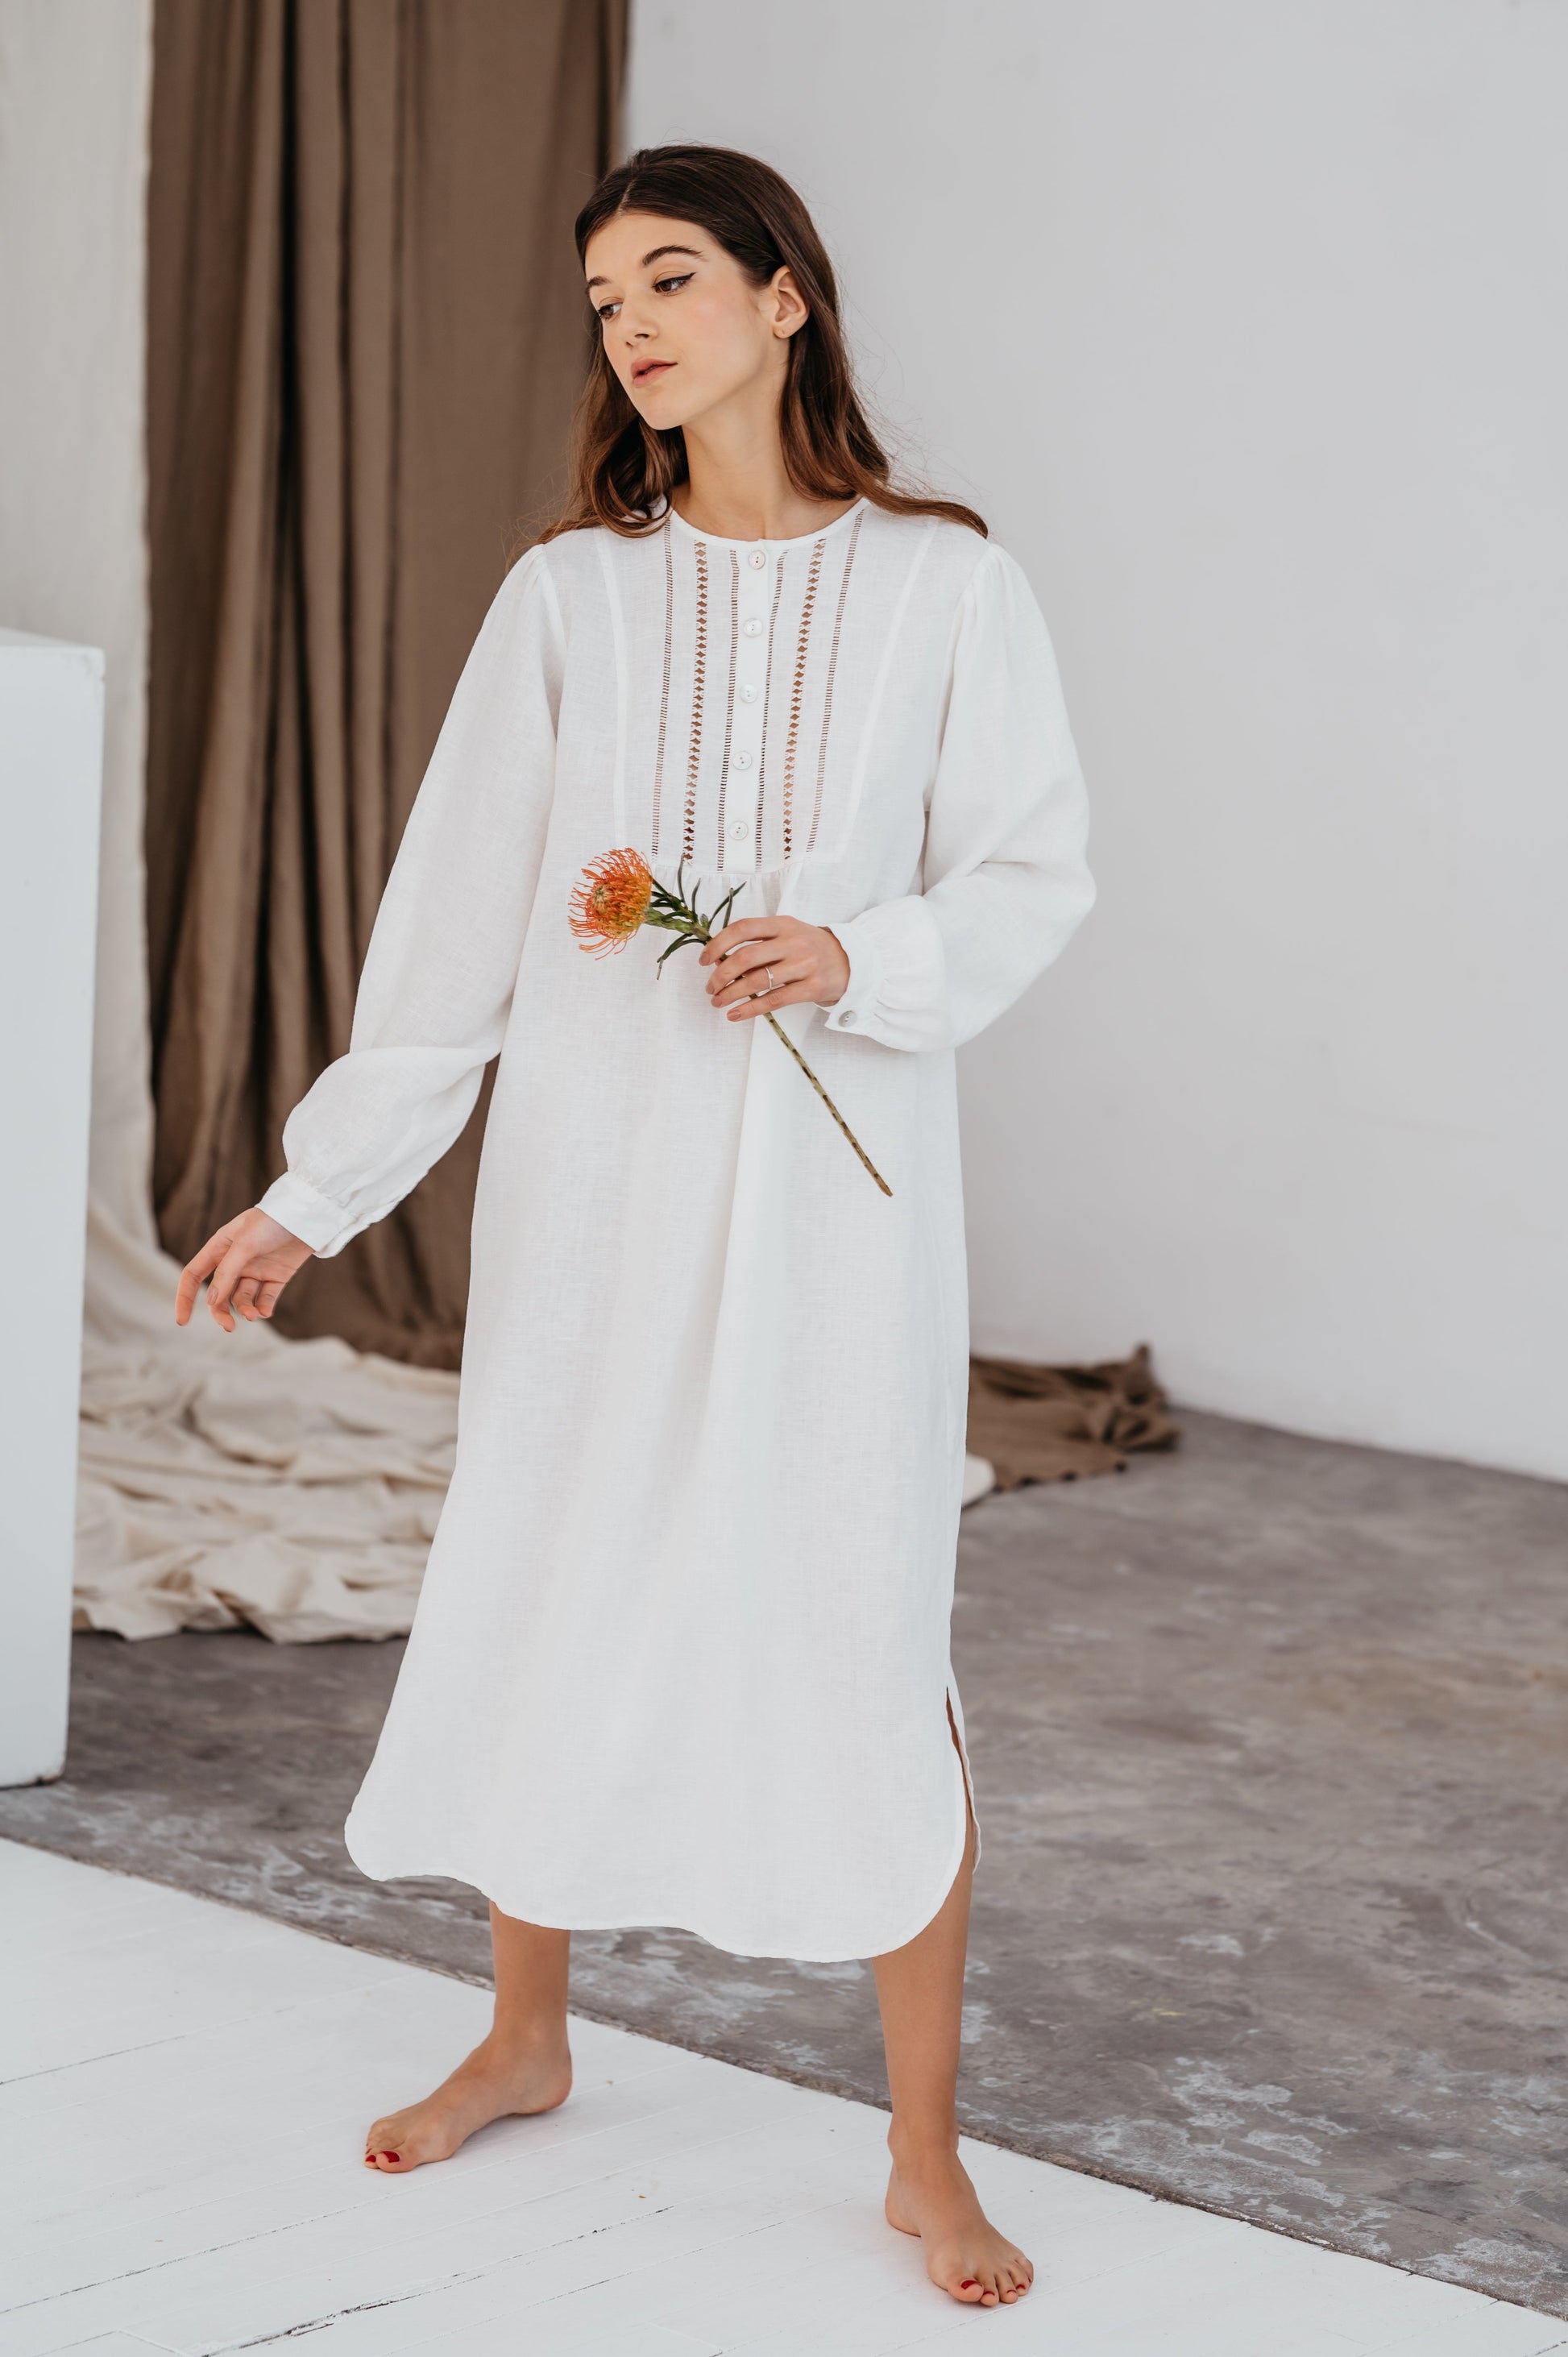 Linen Gown MARIA with Drawnwork on Front